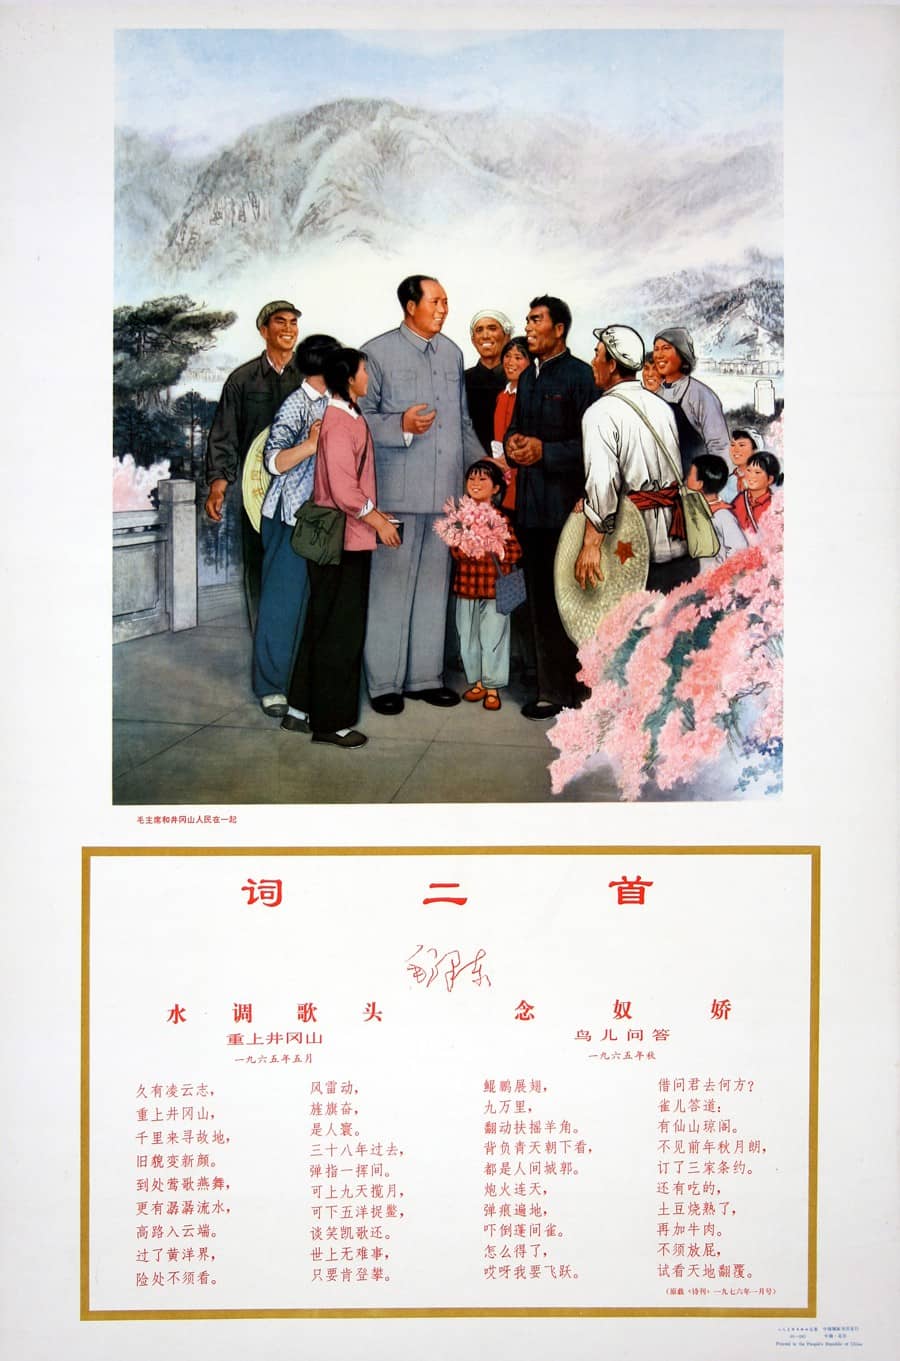 Original Chinese Cultural Revolution Poster c1974 - Two Poems by Mao